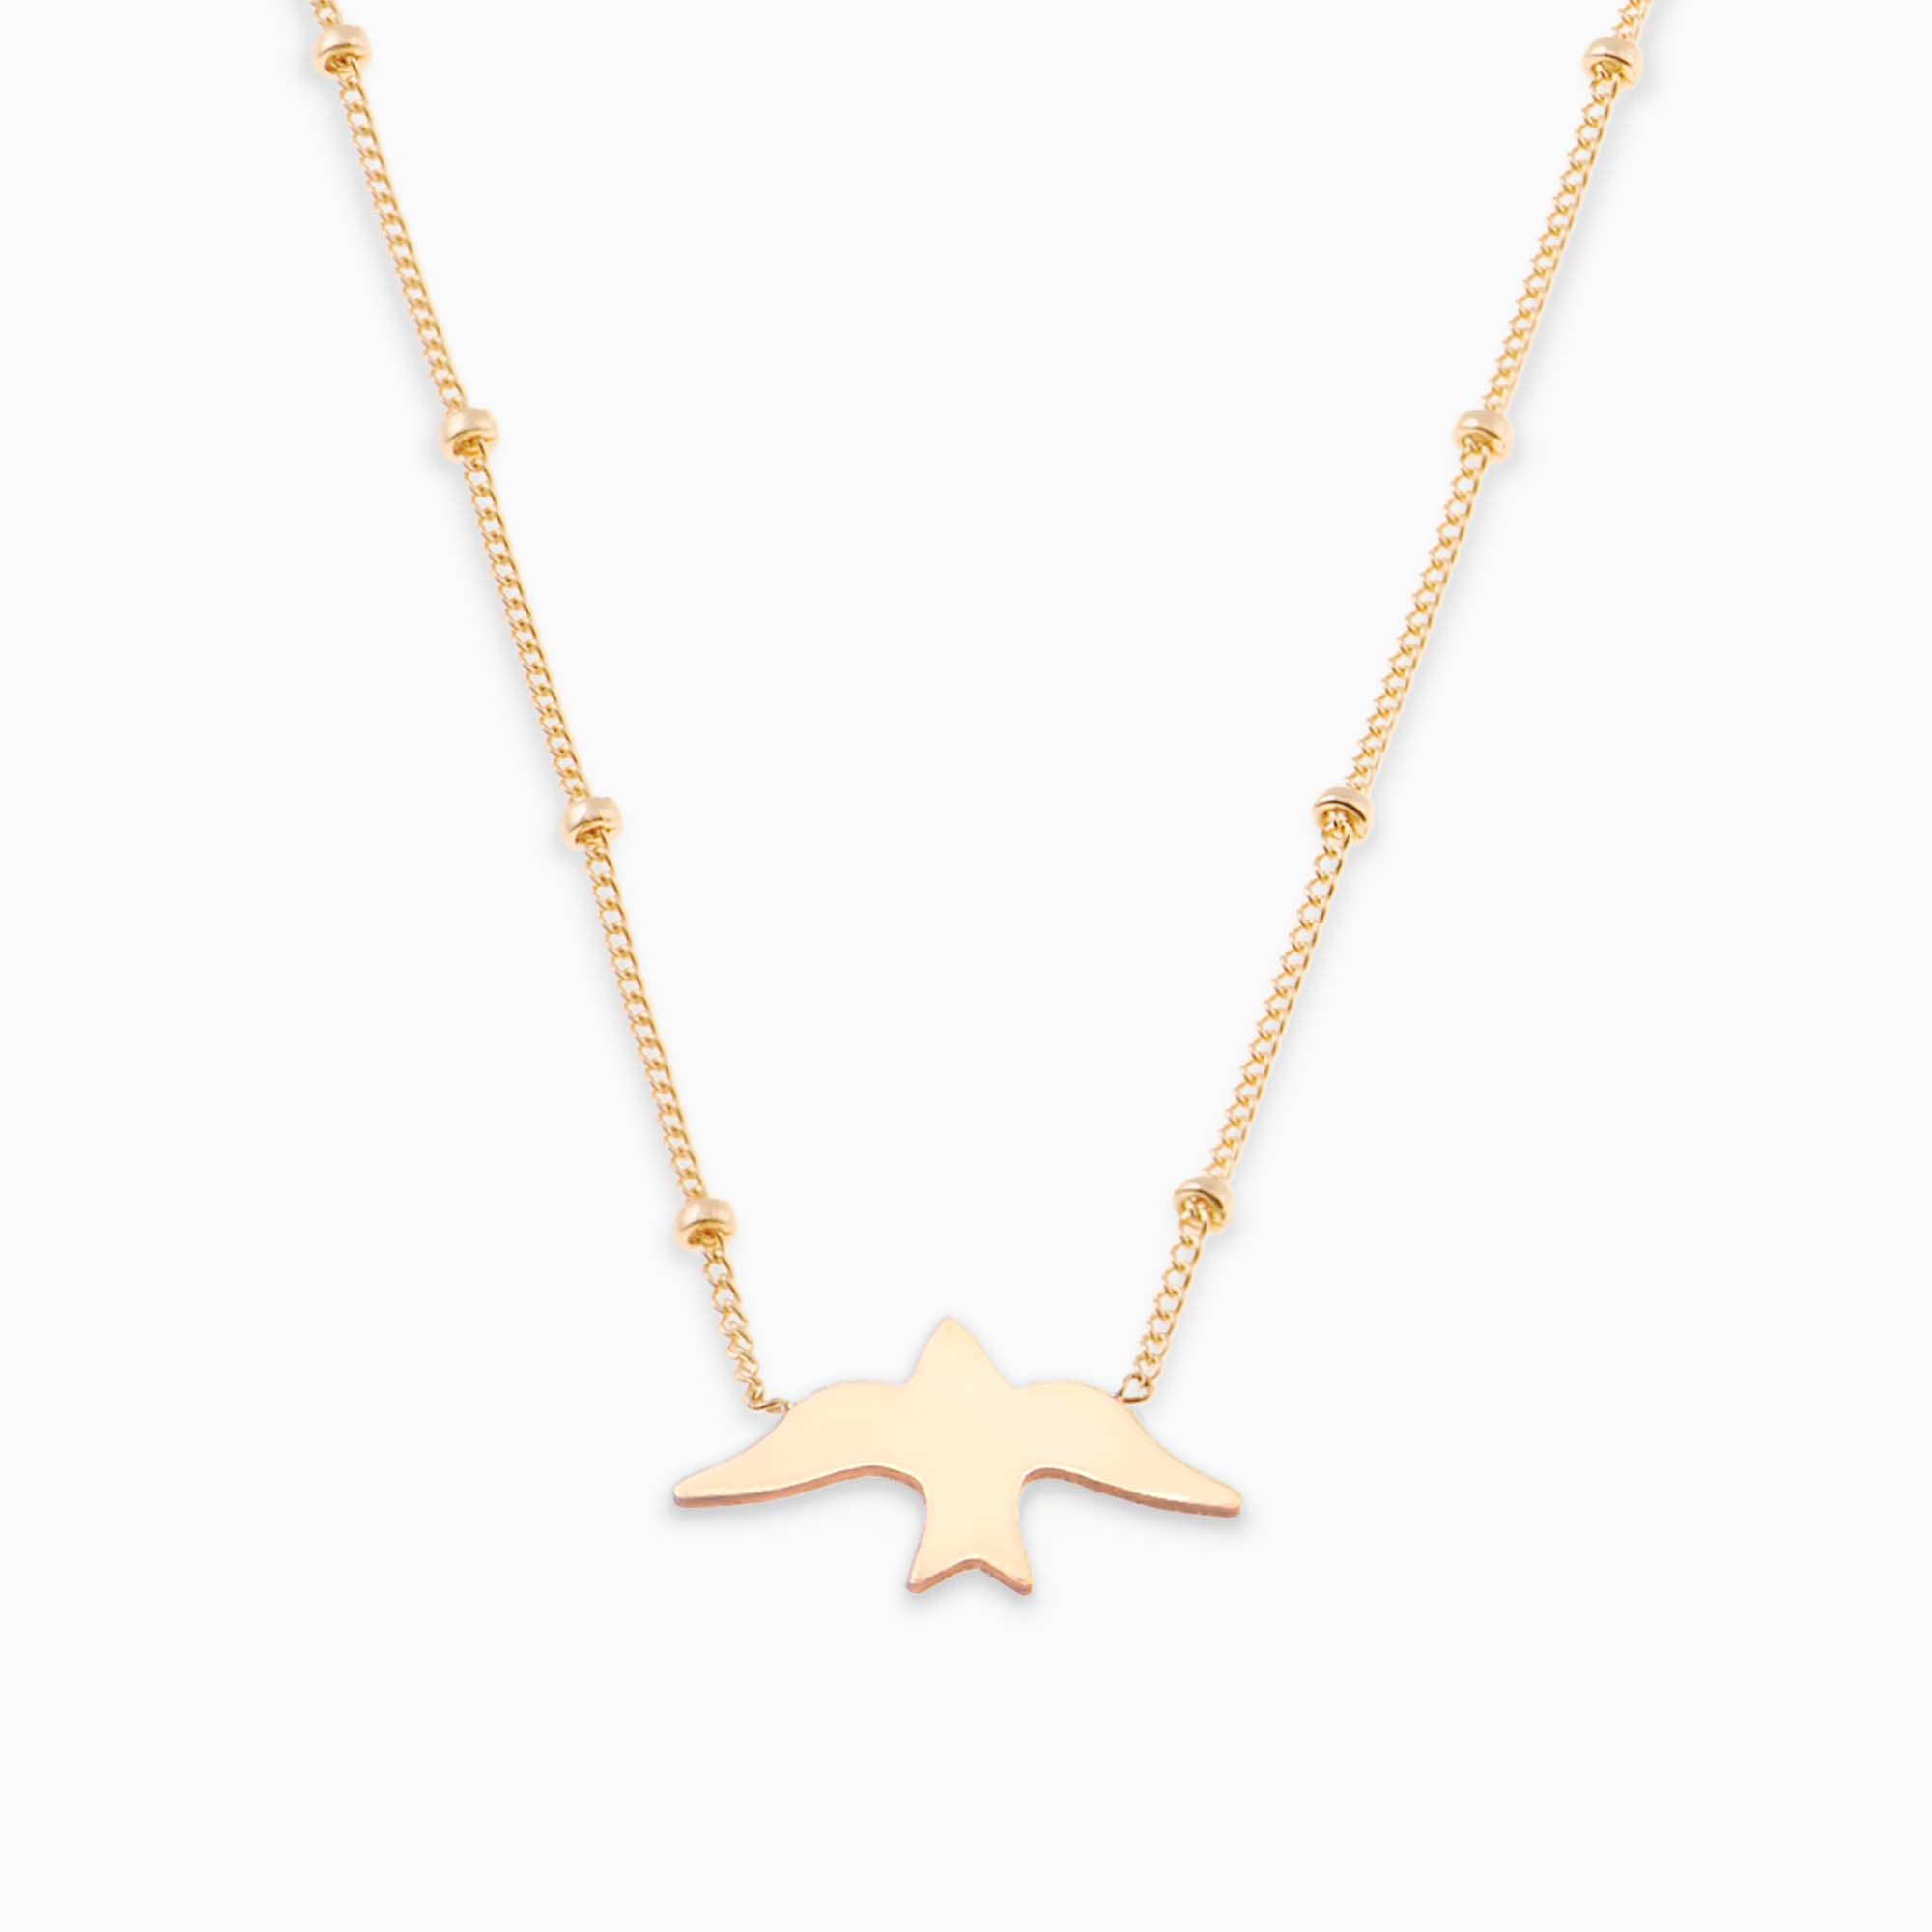 Dove Necklace with Satellite Chain